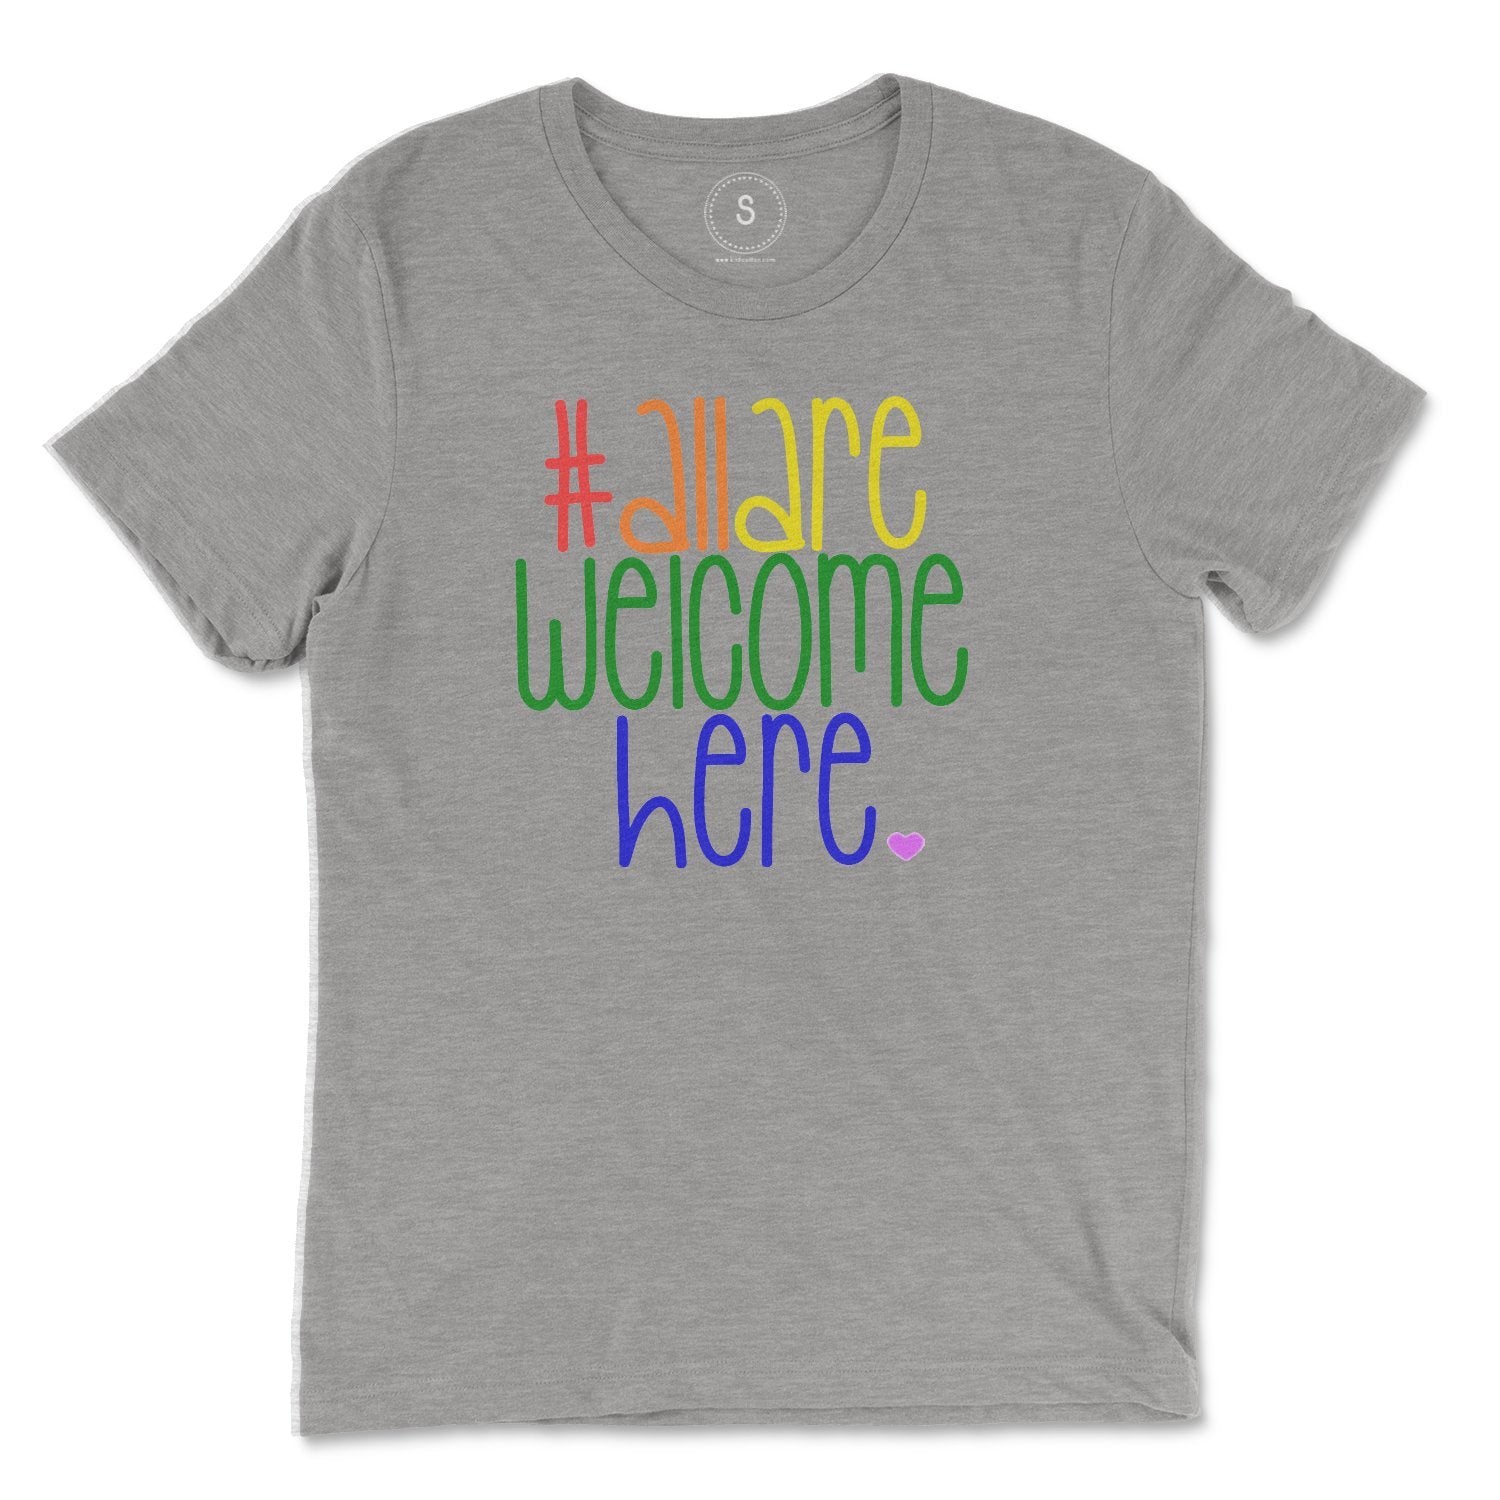 All Are Welcome Here Classic Tee - Kind Cotton